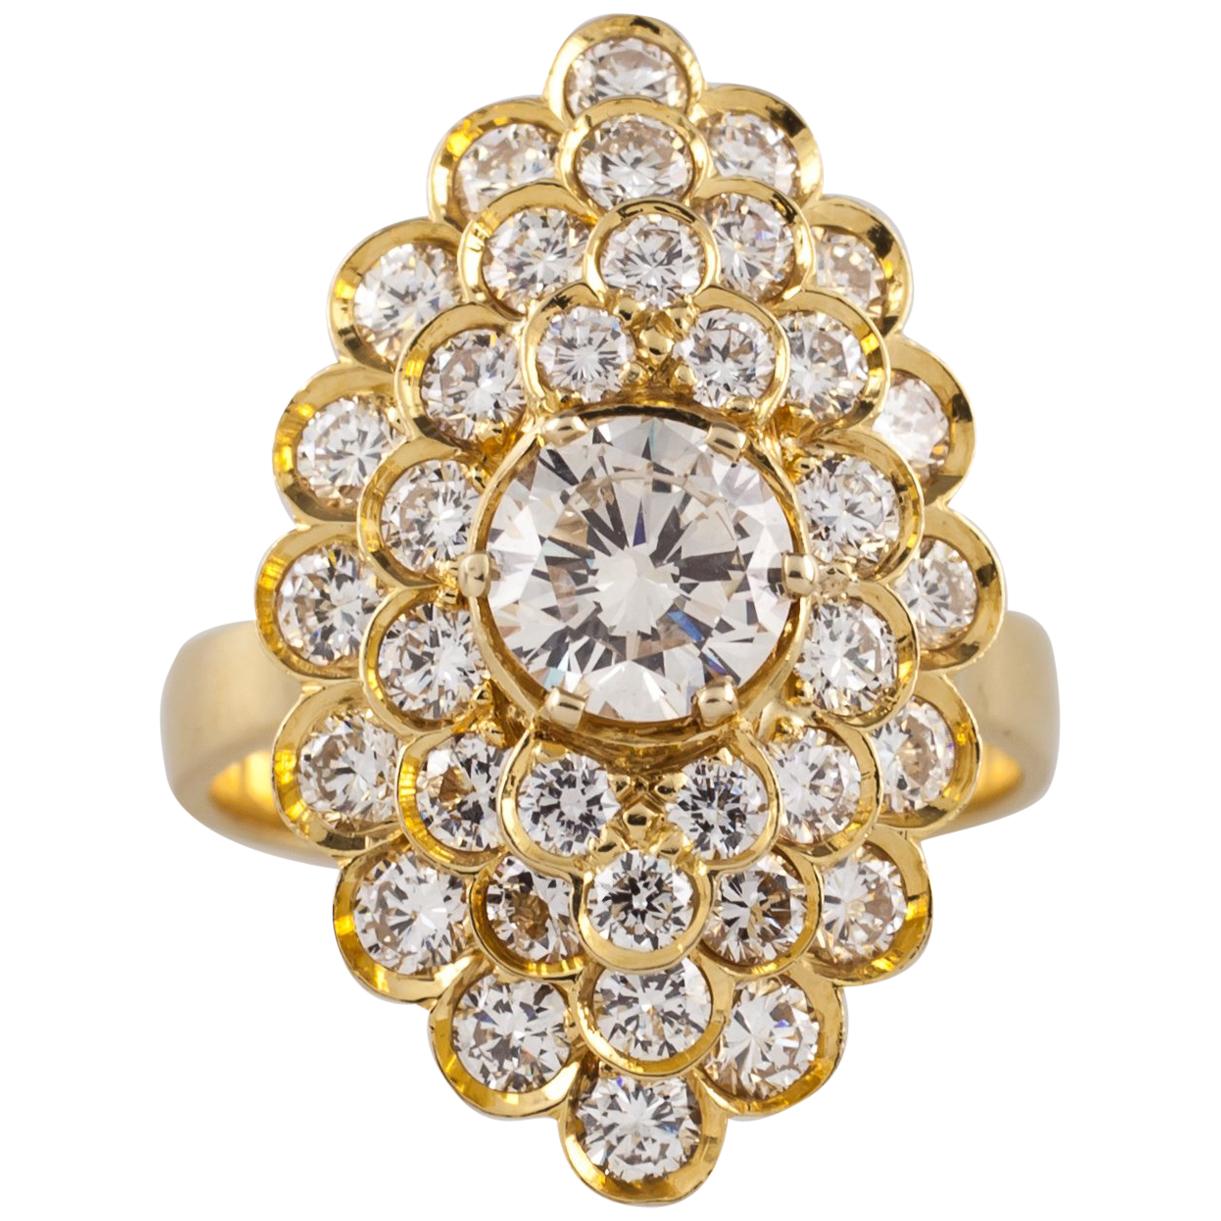 2.72 Carat Diamond Solitaire 18 Karat Gold Cluster Ring with GIA Certified For Sale